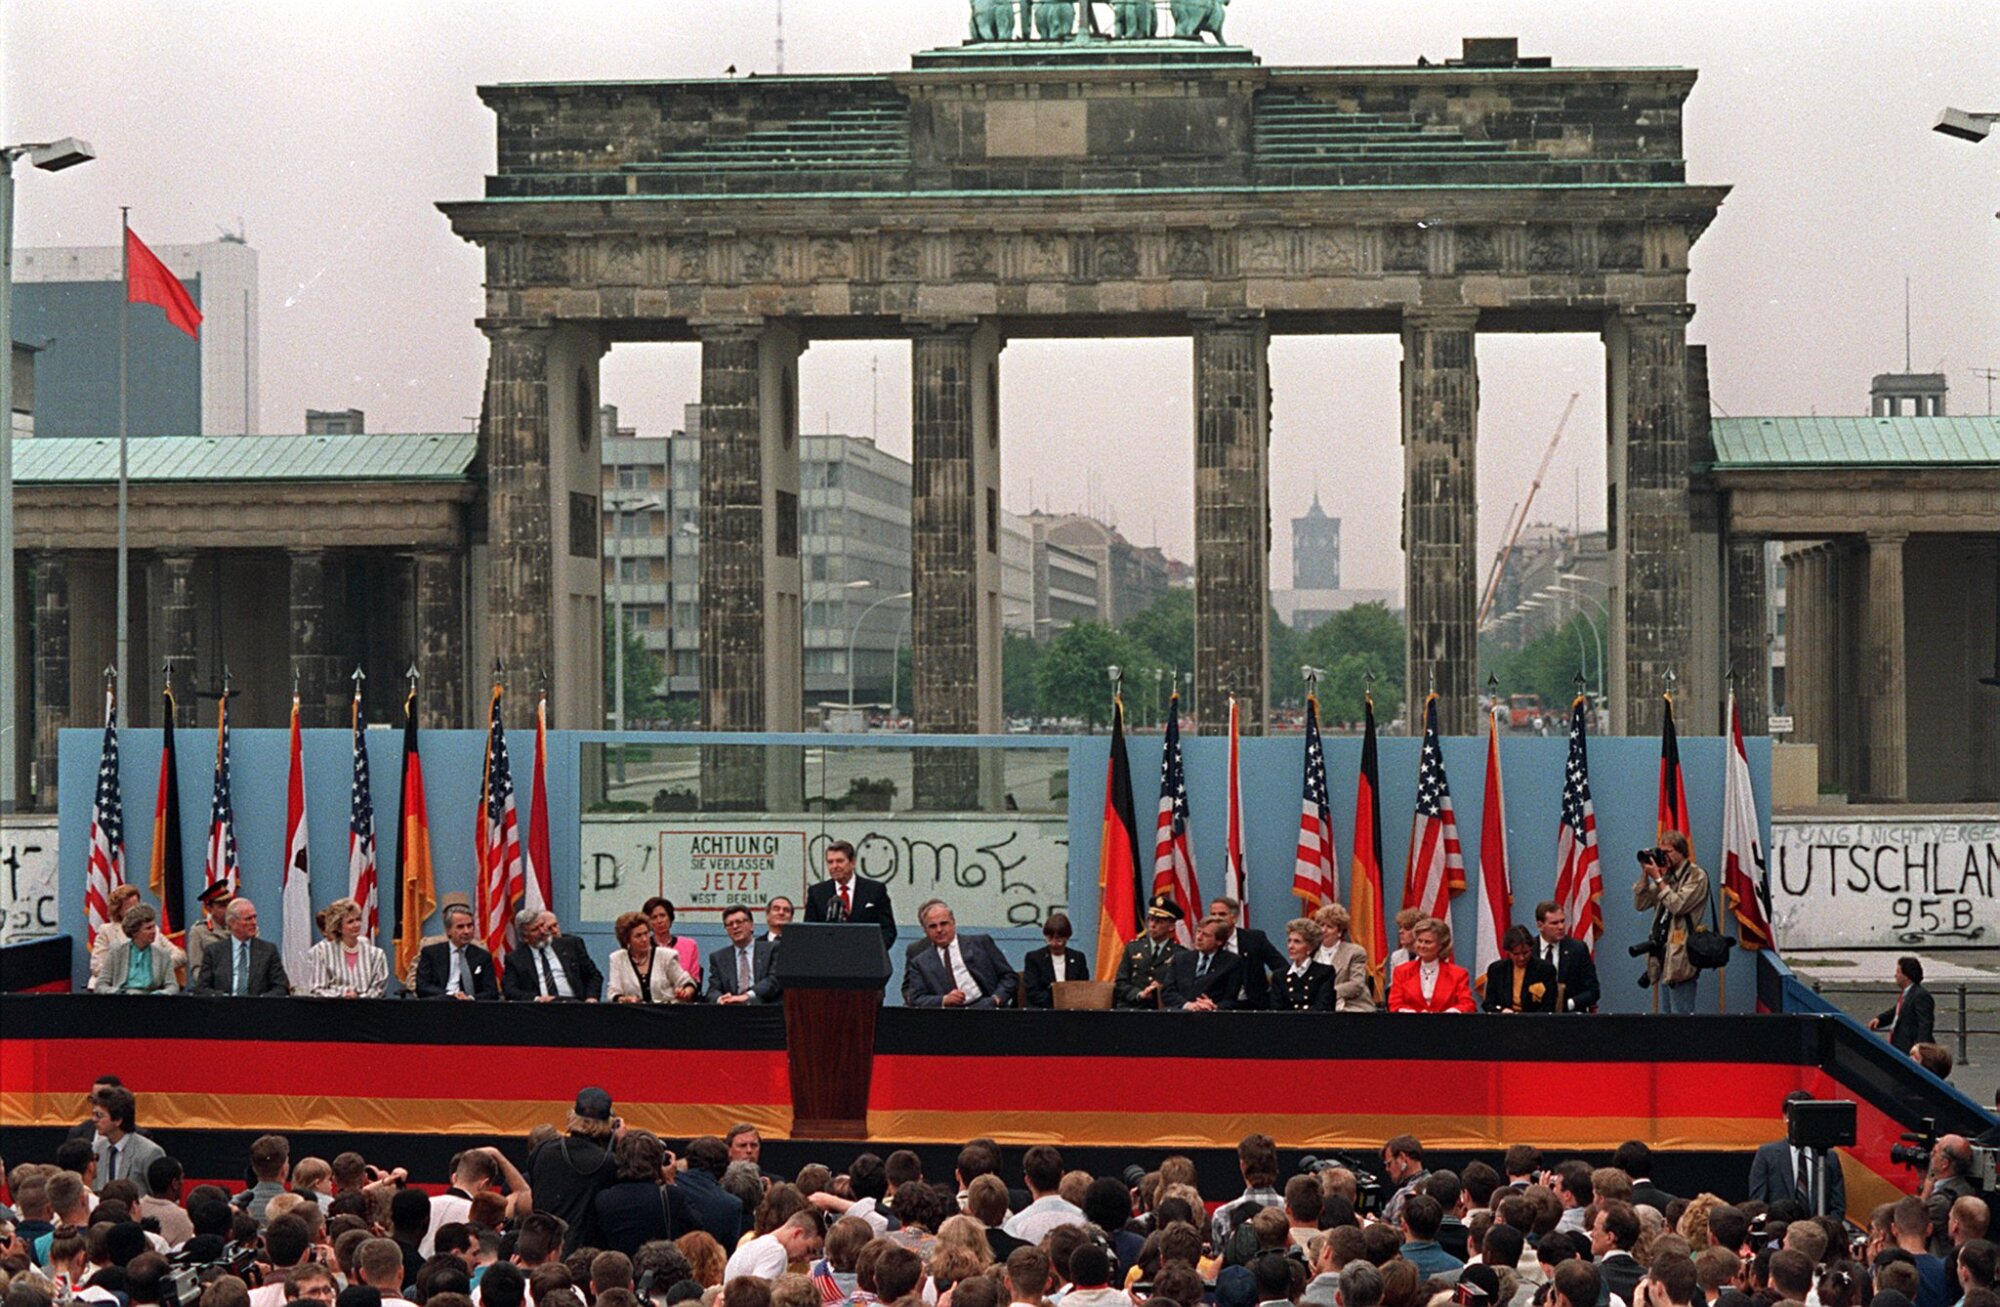 A large monument with six pillars is the backdrop for a man in a suit and tie speaking in front of a row of seated people 